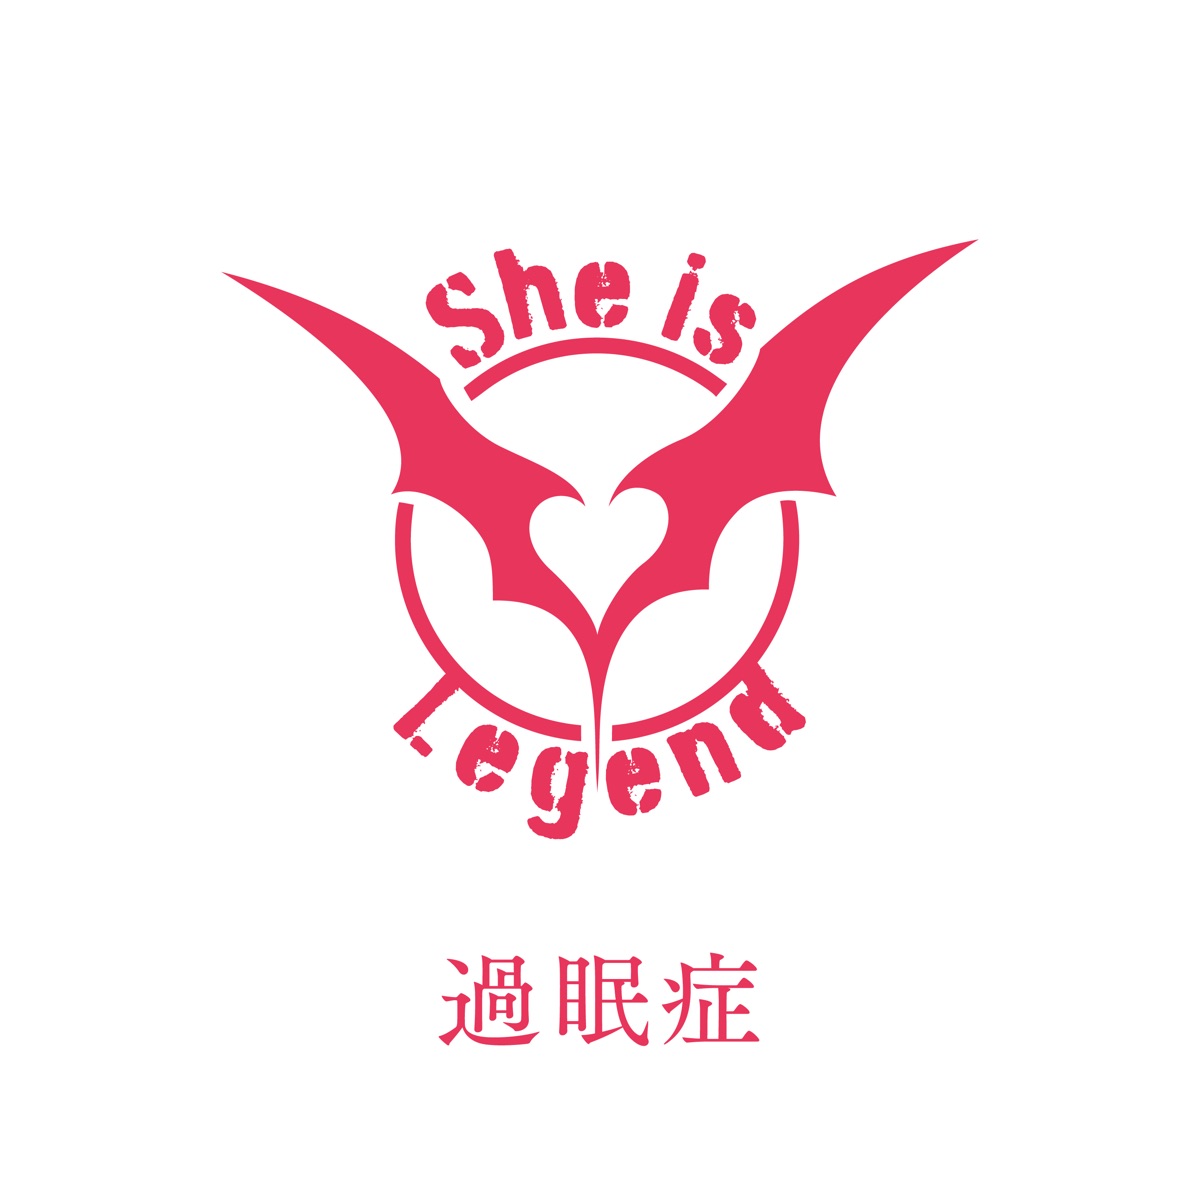 Cover art for『She is Legend - 過眠症』from the release『Kaminshou